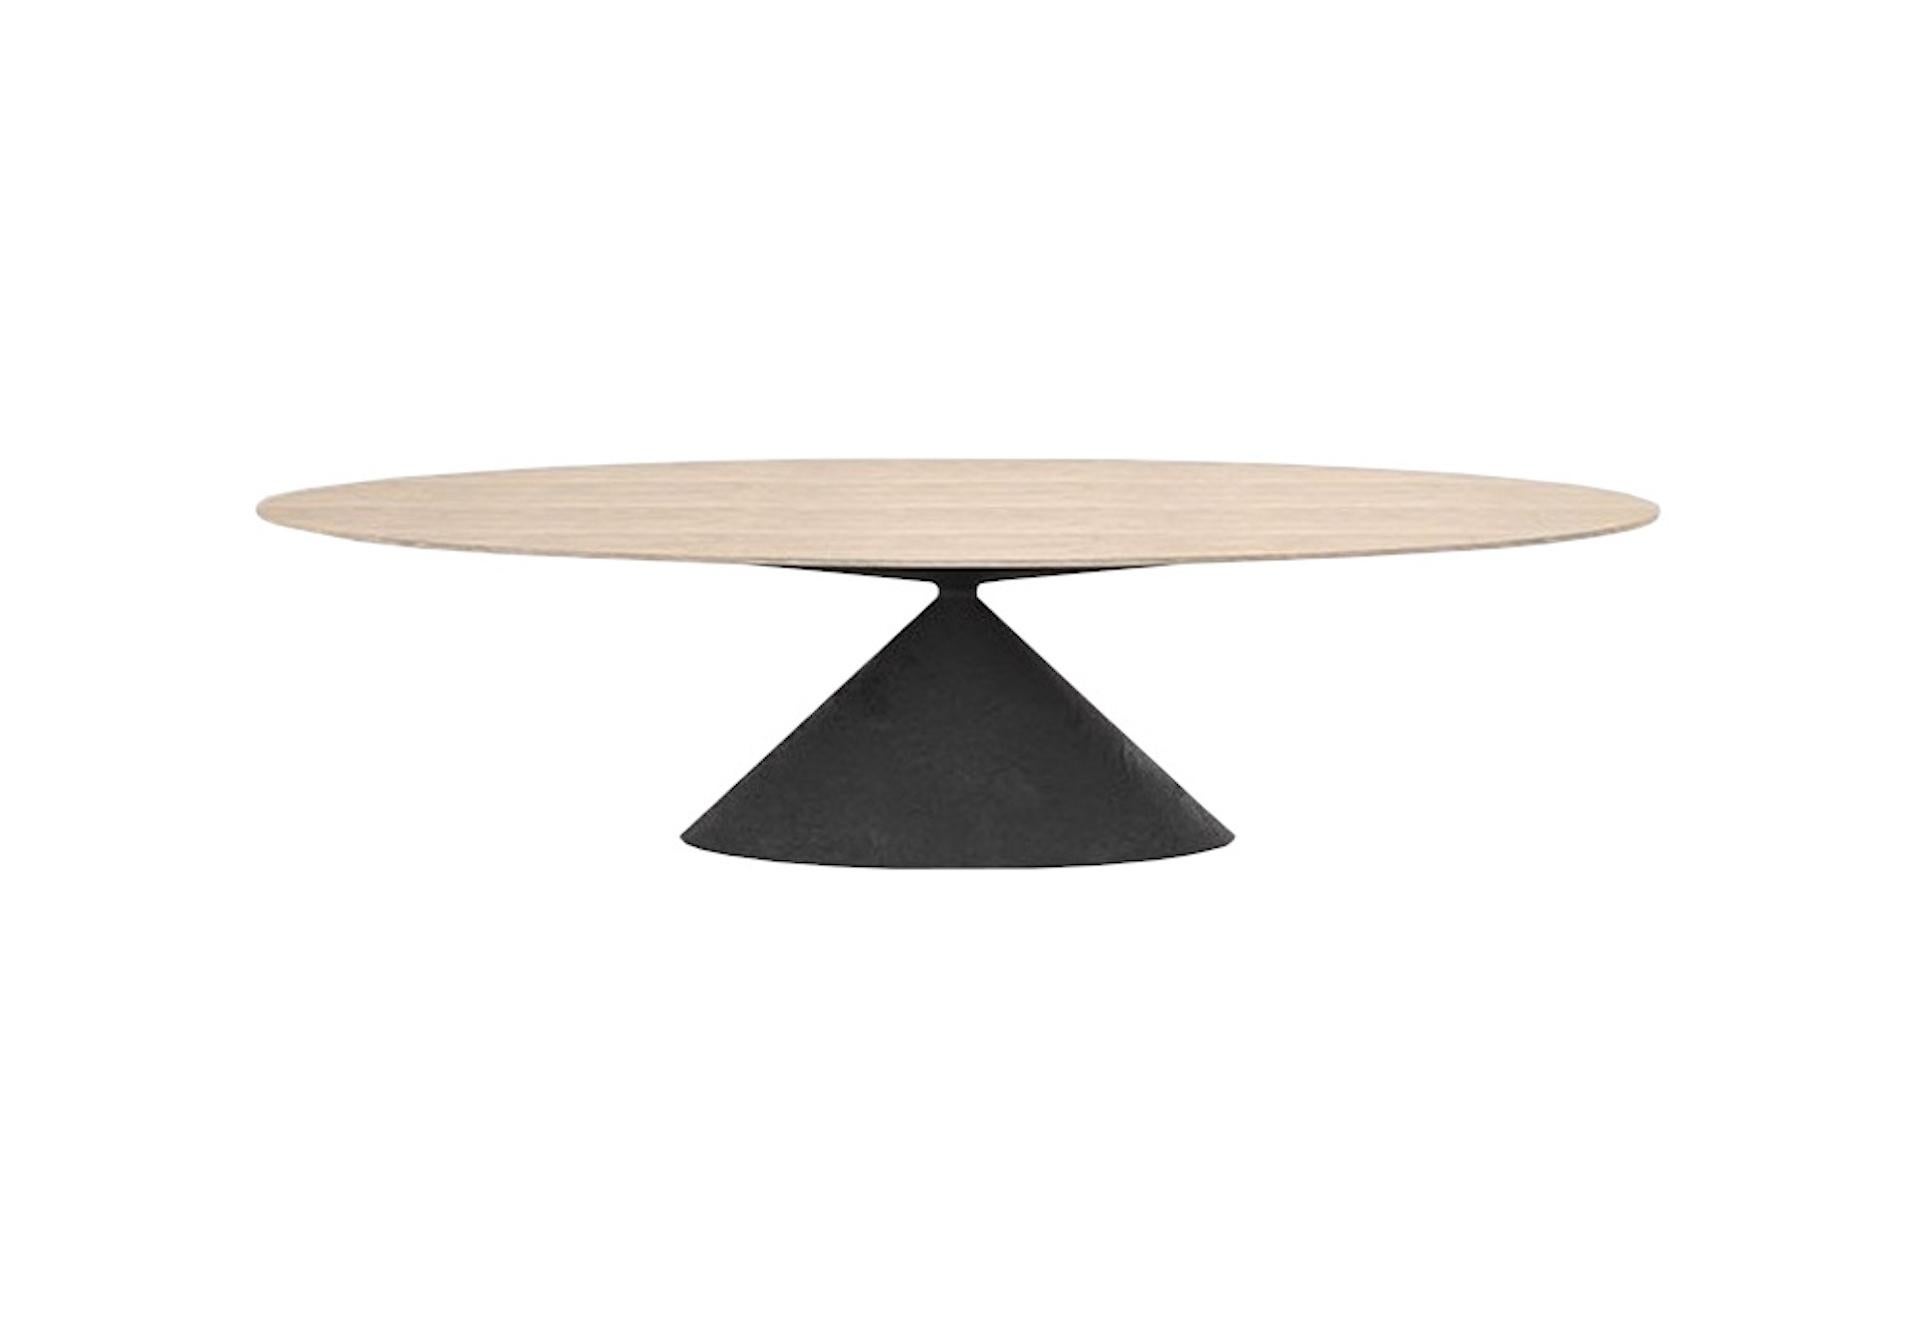 Italian Customizable Desalto Maxi Clay Table with Ash Top by Marc Krusin For Sale